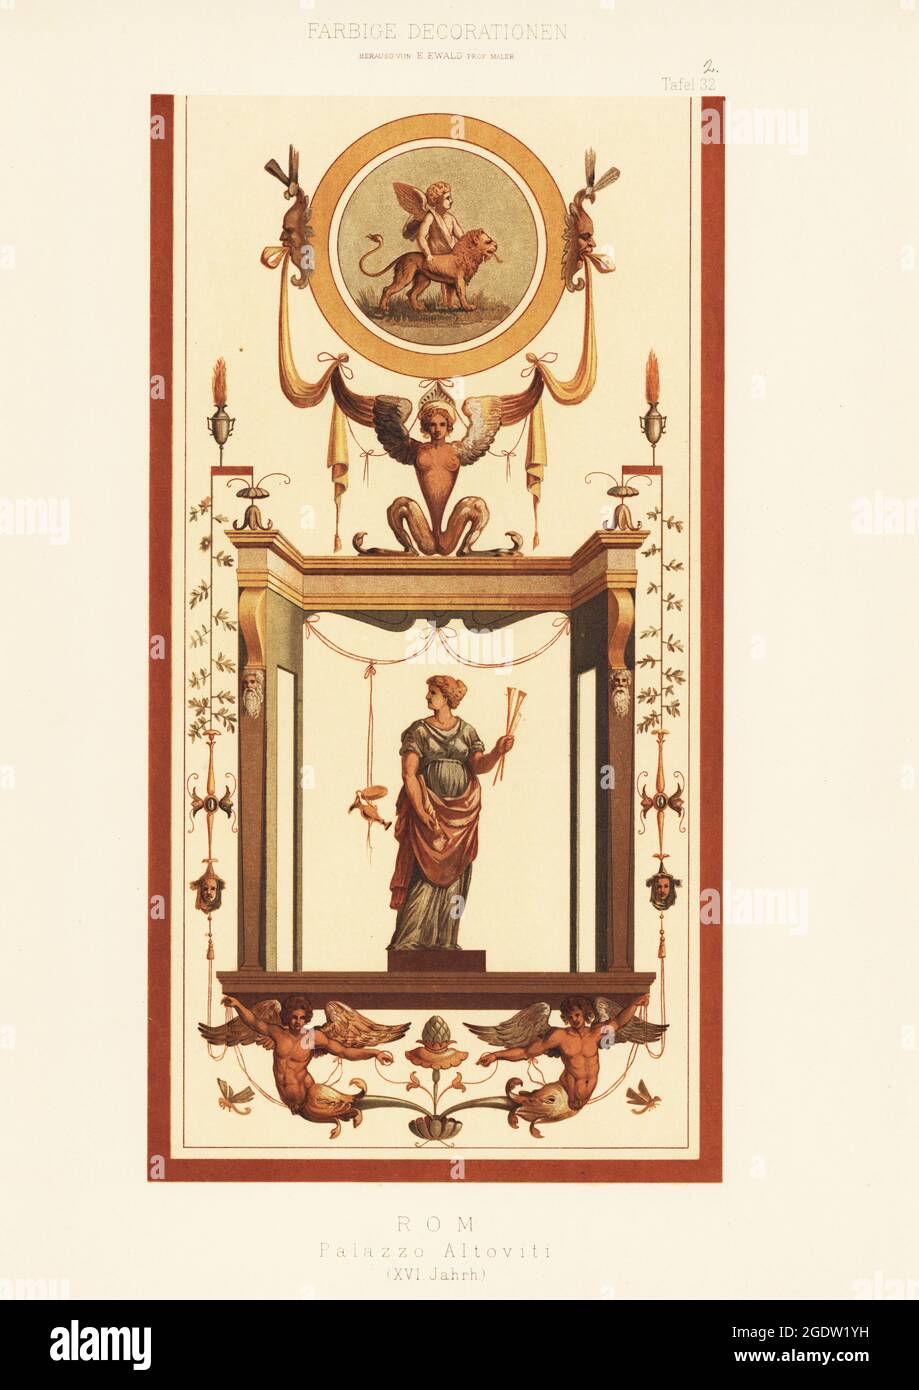 Wall painting in the Altoviti Palace, Rome, 16th century. Palazzo Altoviti, Rom, XVI Jahrh. Chromolithograph from Ernst Ewald’s Farbige decorationen, alter und never Zeit (Color decoration, ancient and new eras), Ernst Wasmuth, Berlin, 1889. Stock Photo